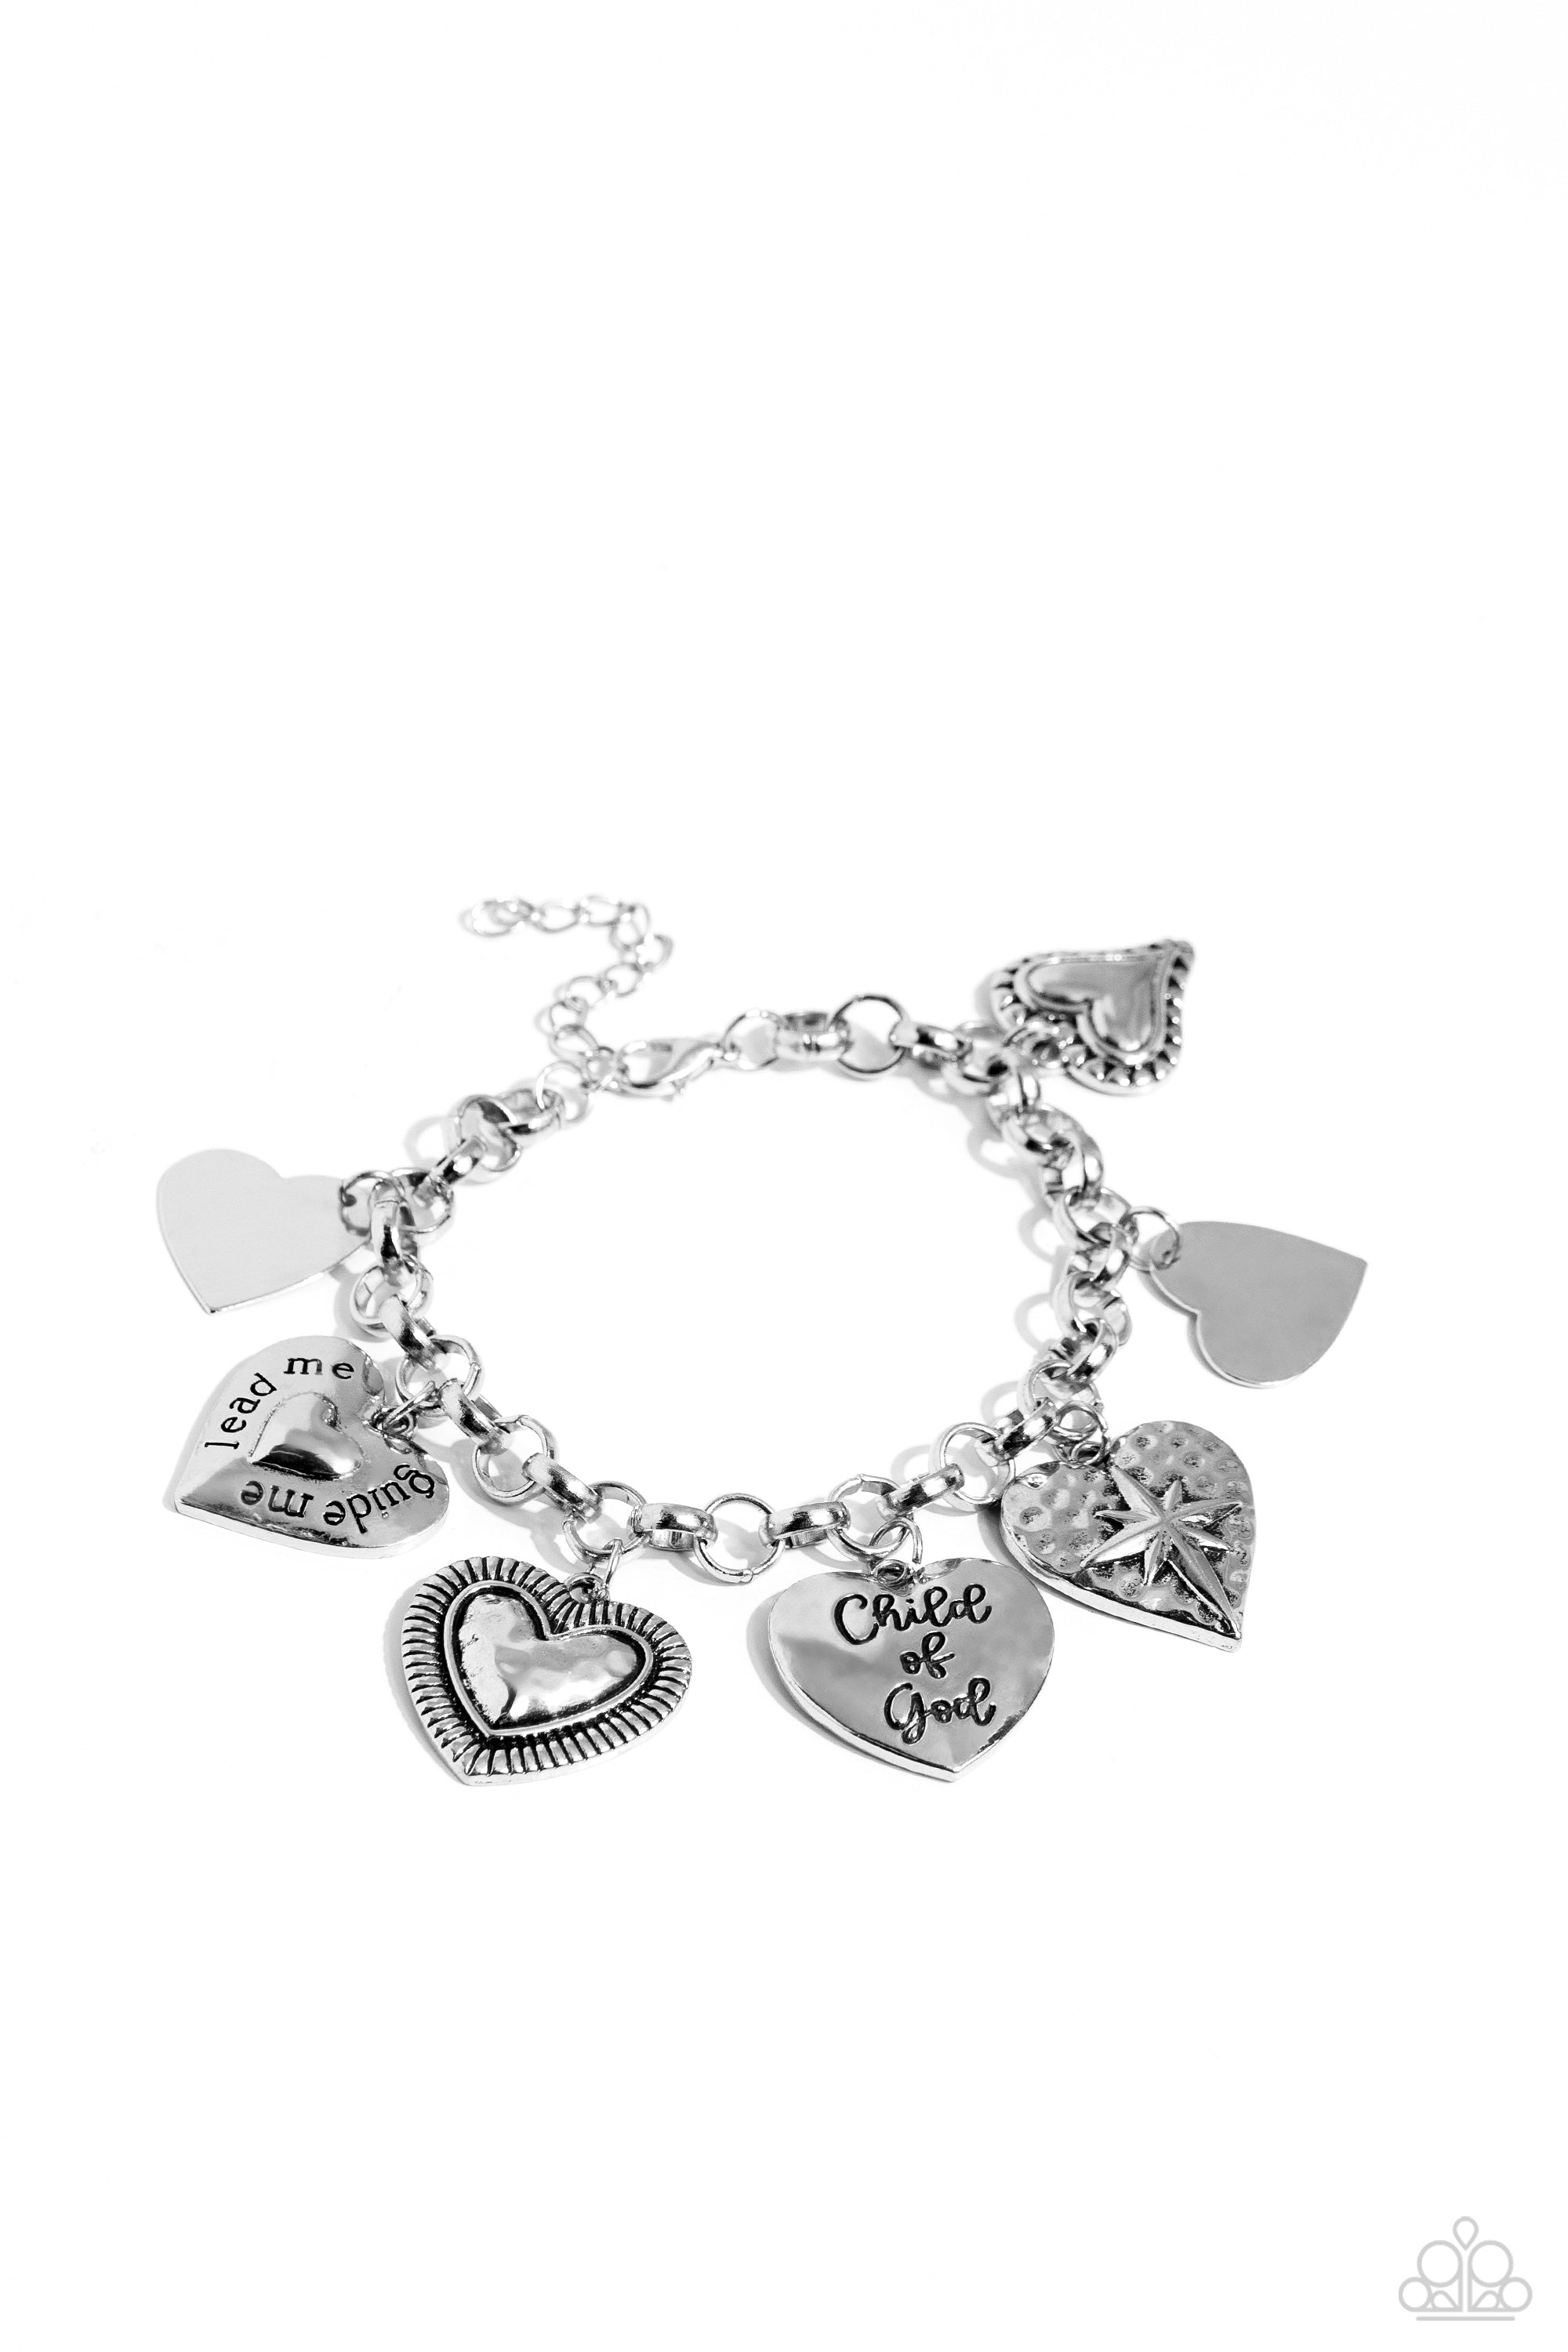 Child of God Silver Heart Charm Bracelet - Paparazzi Accessories- lightbox - CarasShop.com - $5 Jewelry by Cara Jewels